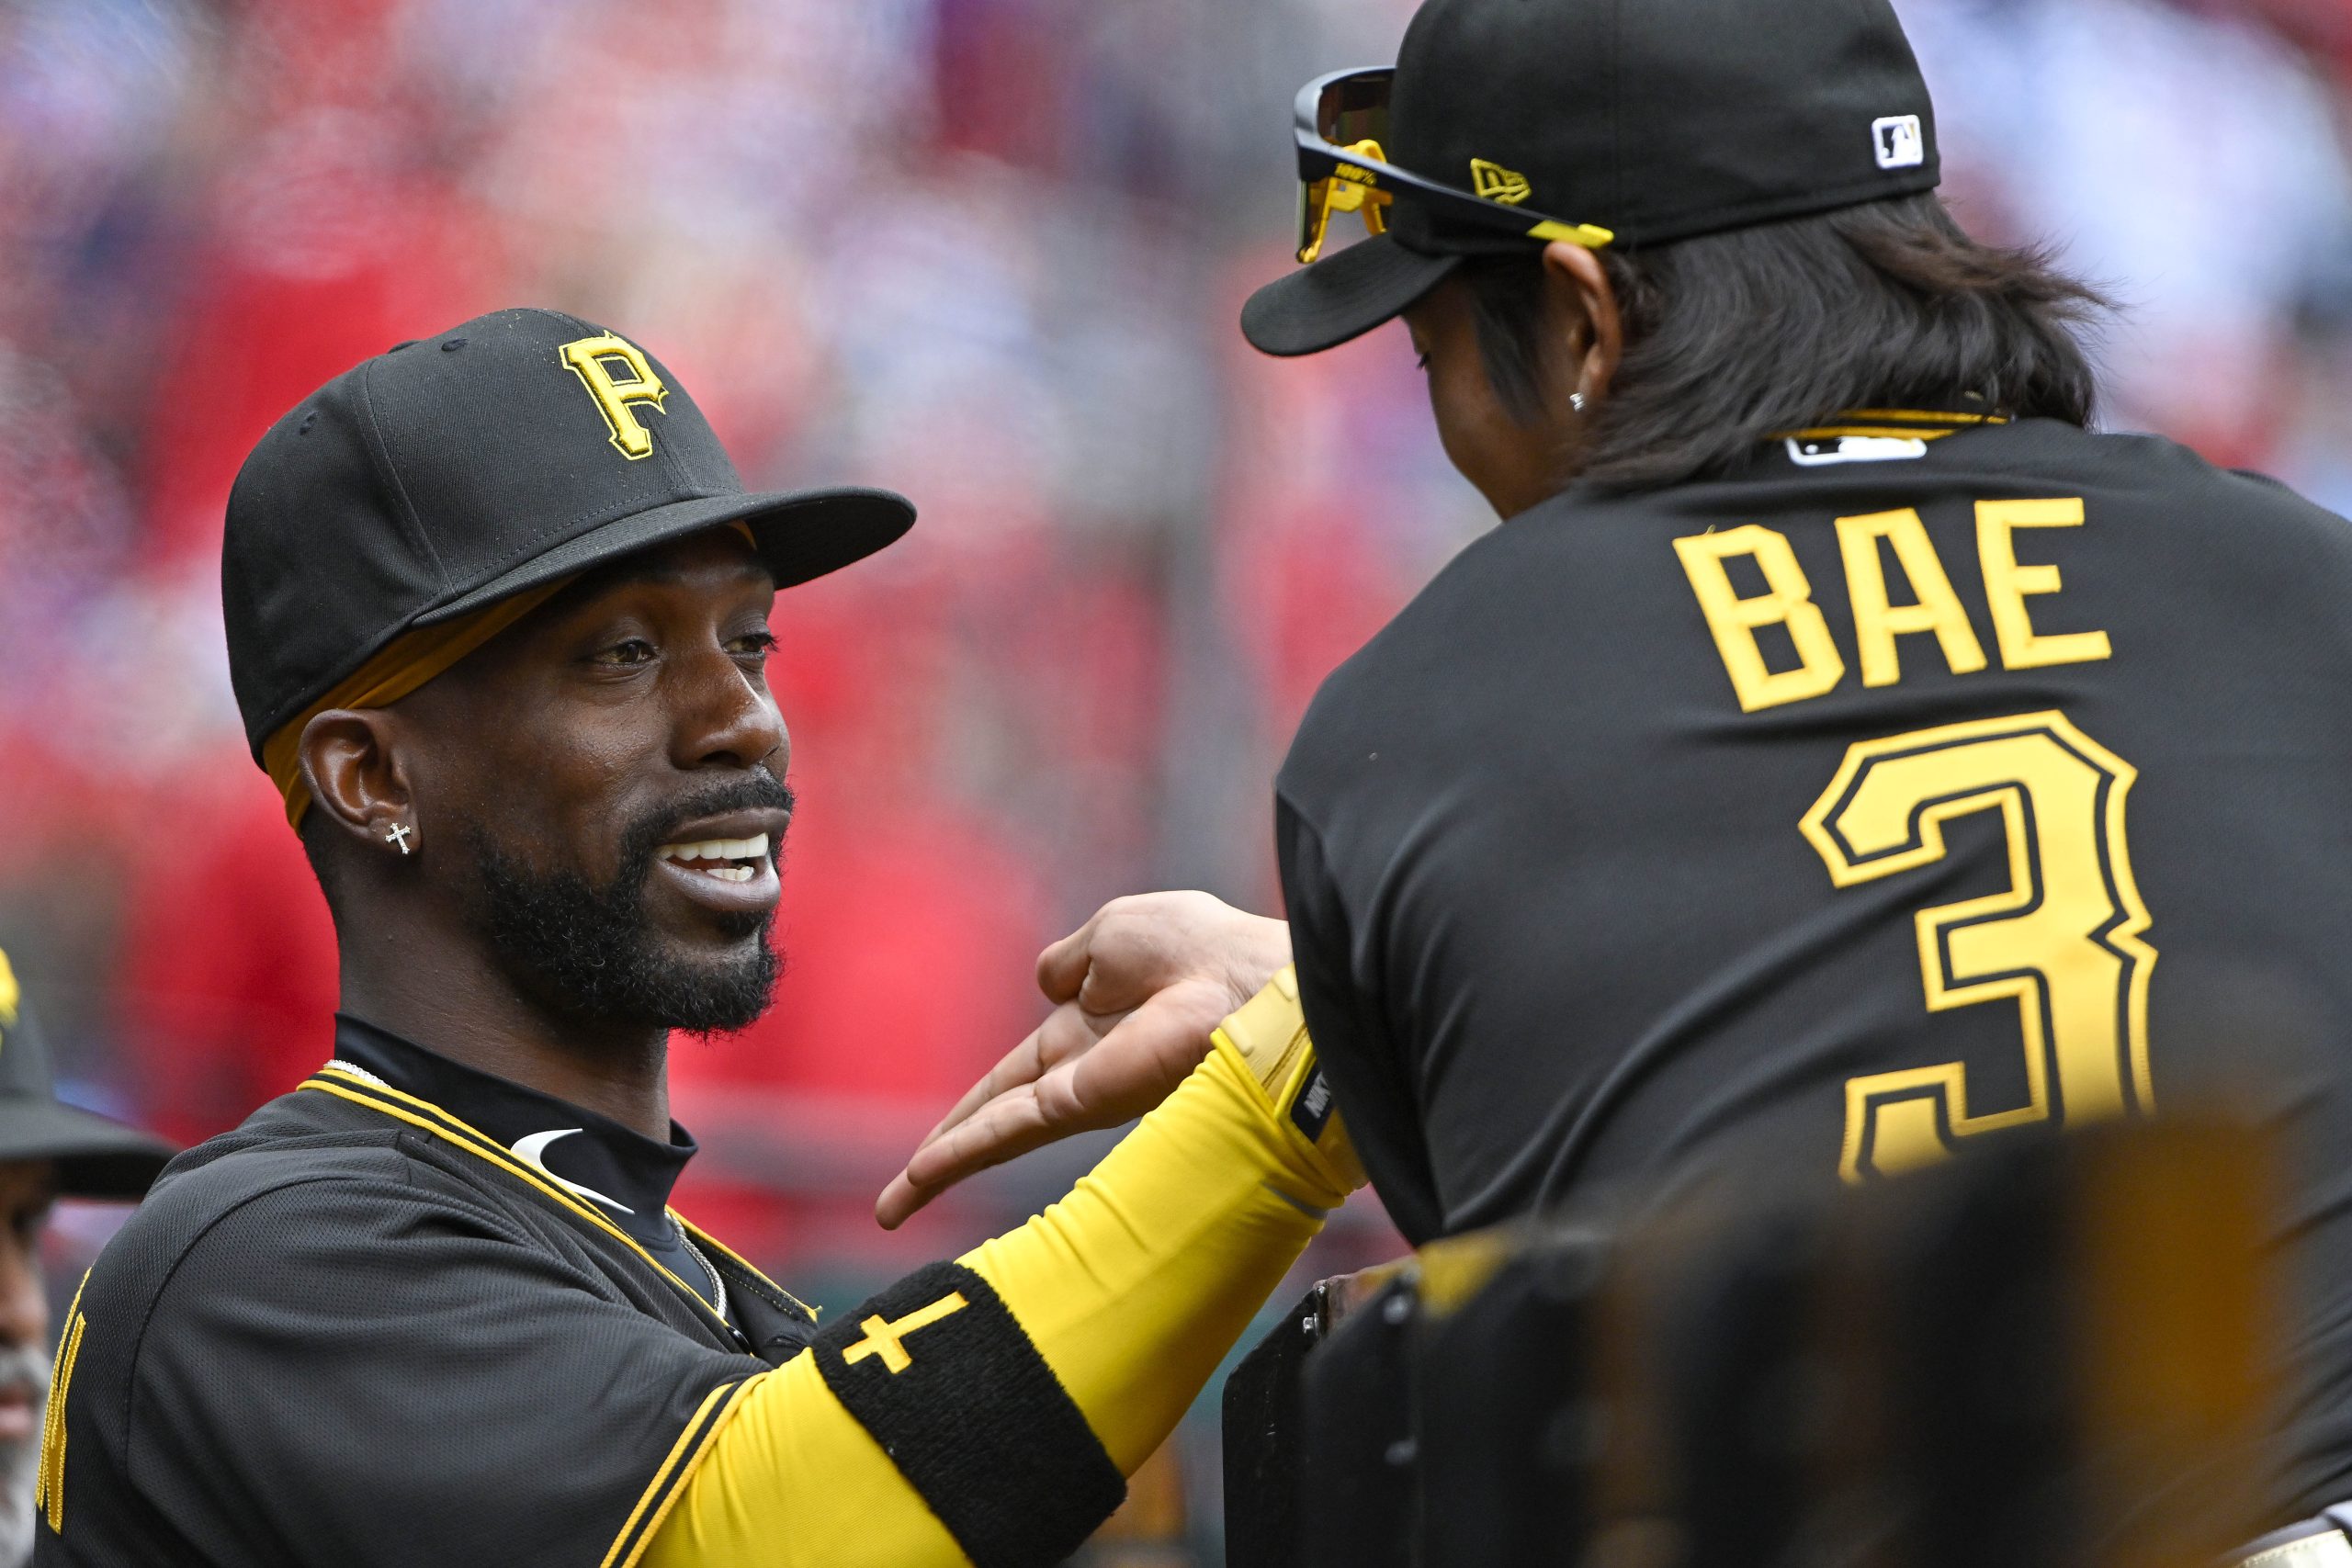 Bae walk-off wins it for Pirates